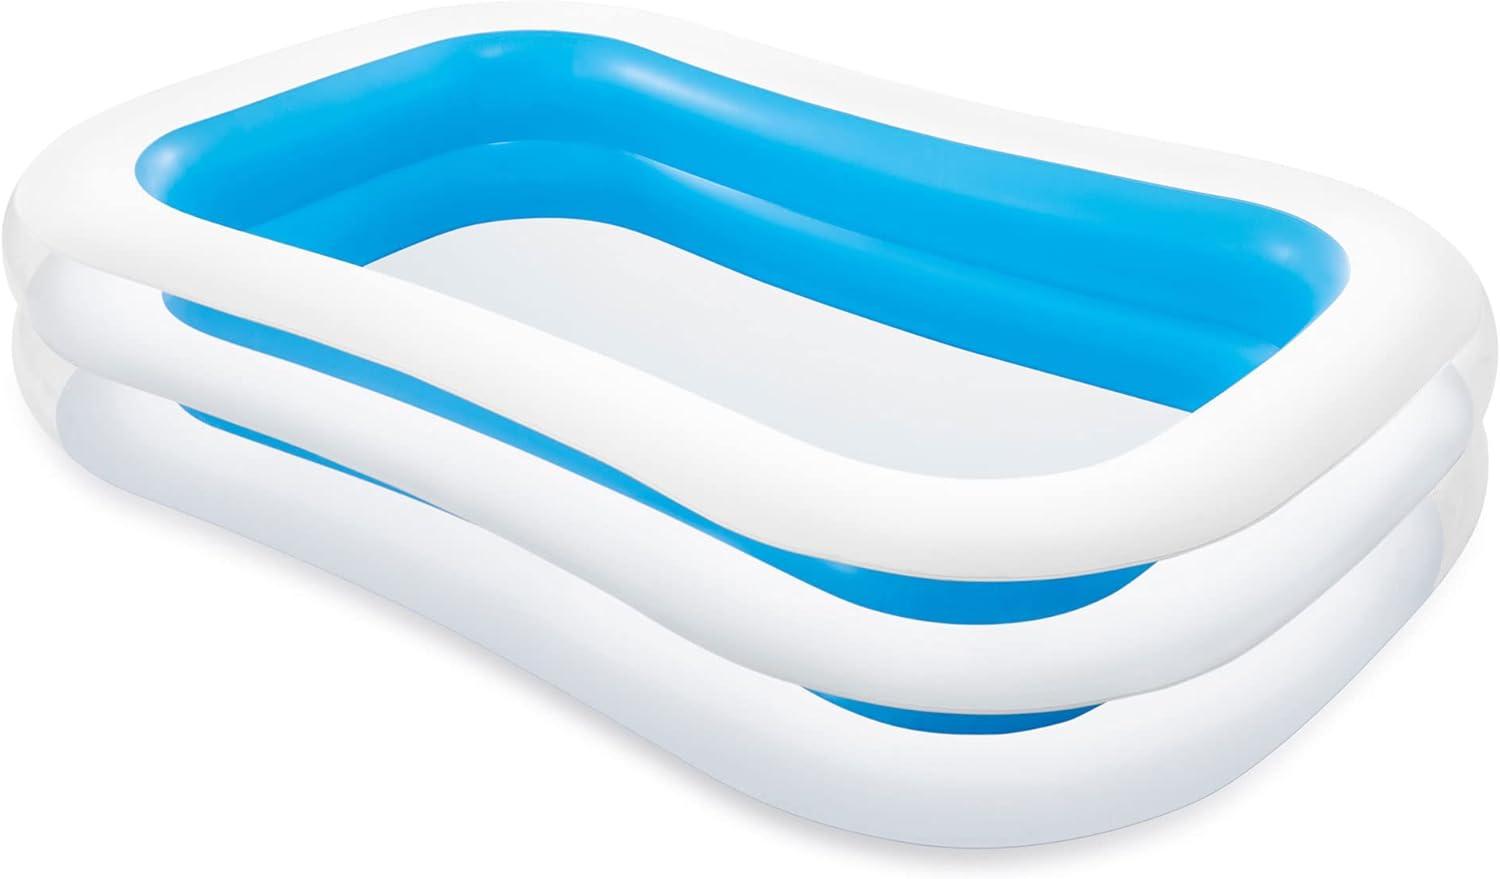 Intex Swim Centre Family Inflatable Pool, 103' x 69' x 22' (Assorted Colors: Blue or Green) Bild 1